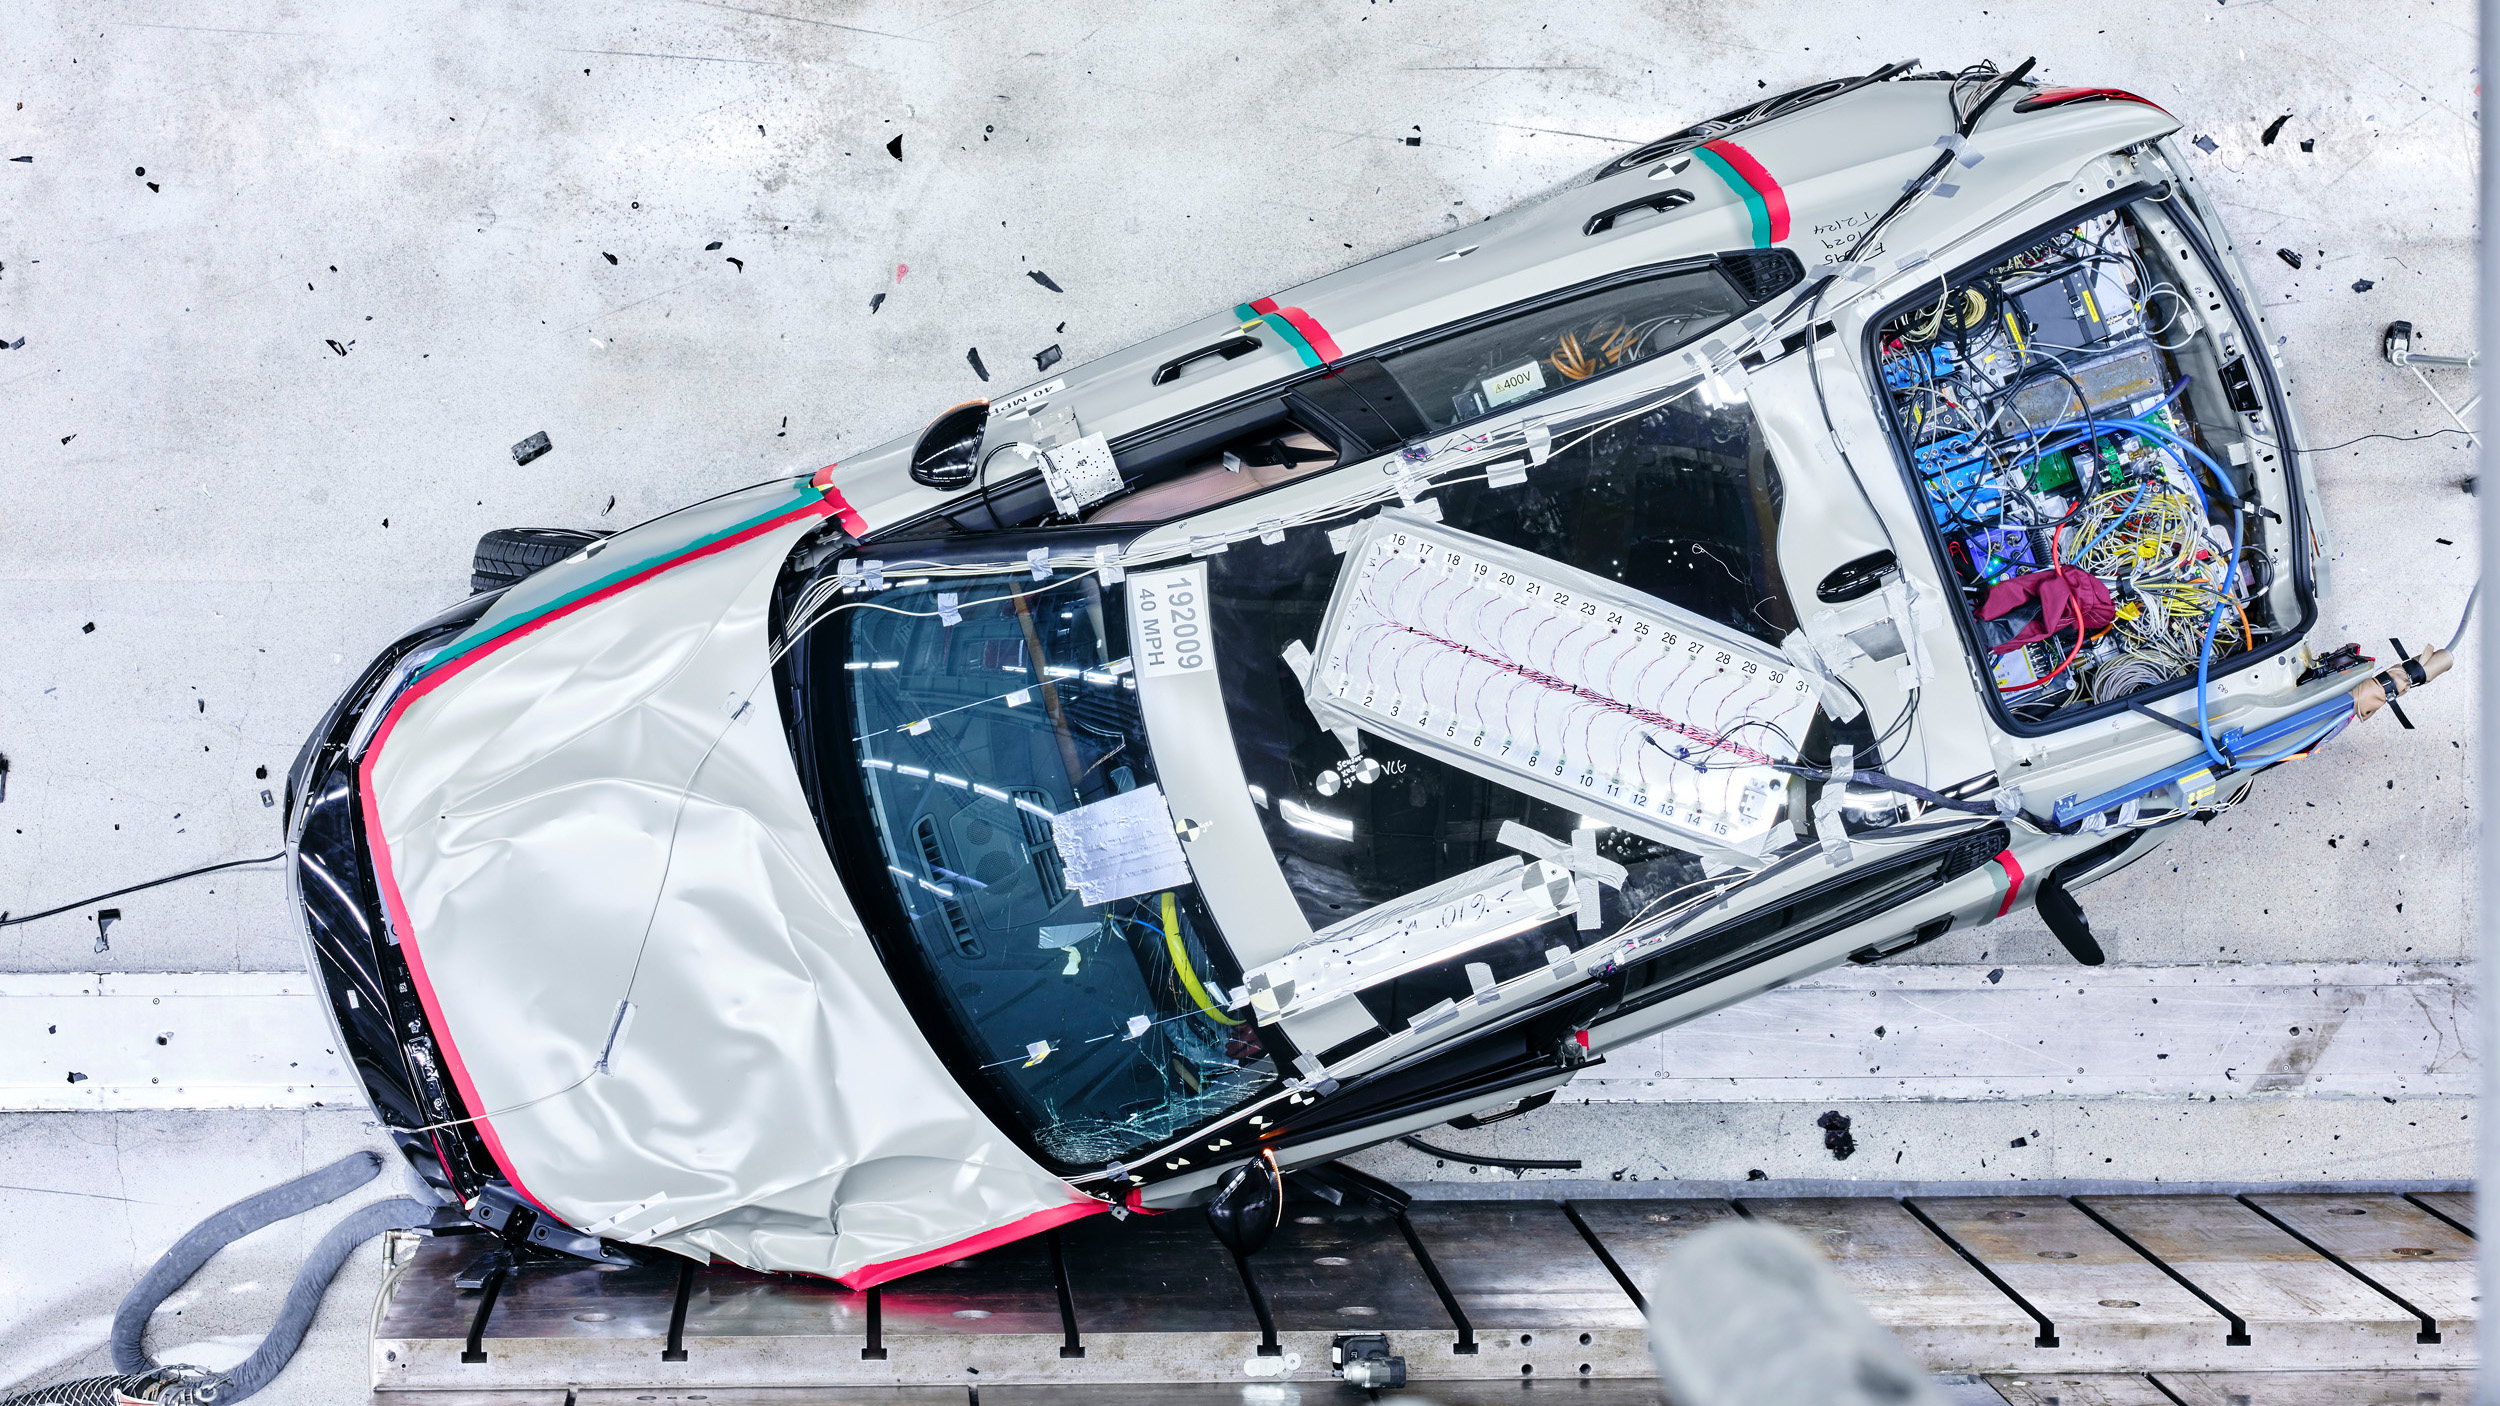 Polestar details all the neat crash technologies on the 2 electric car